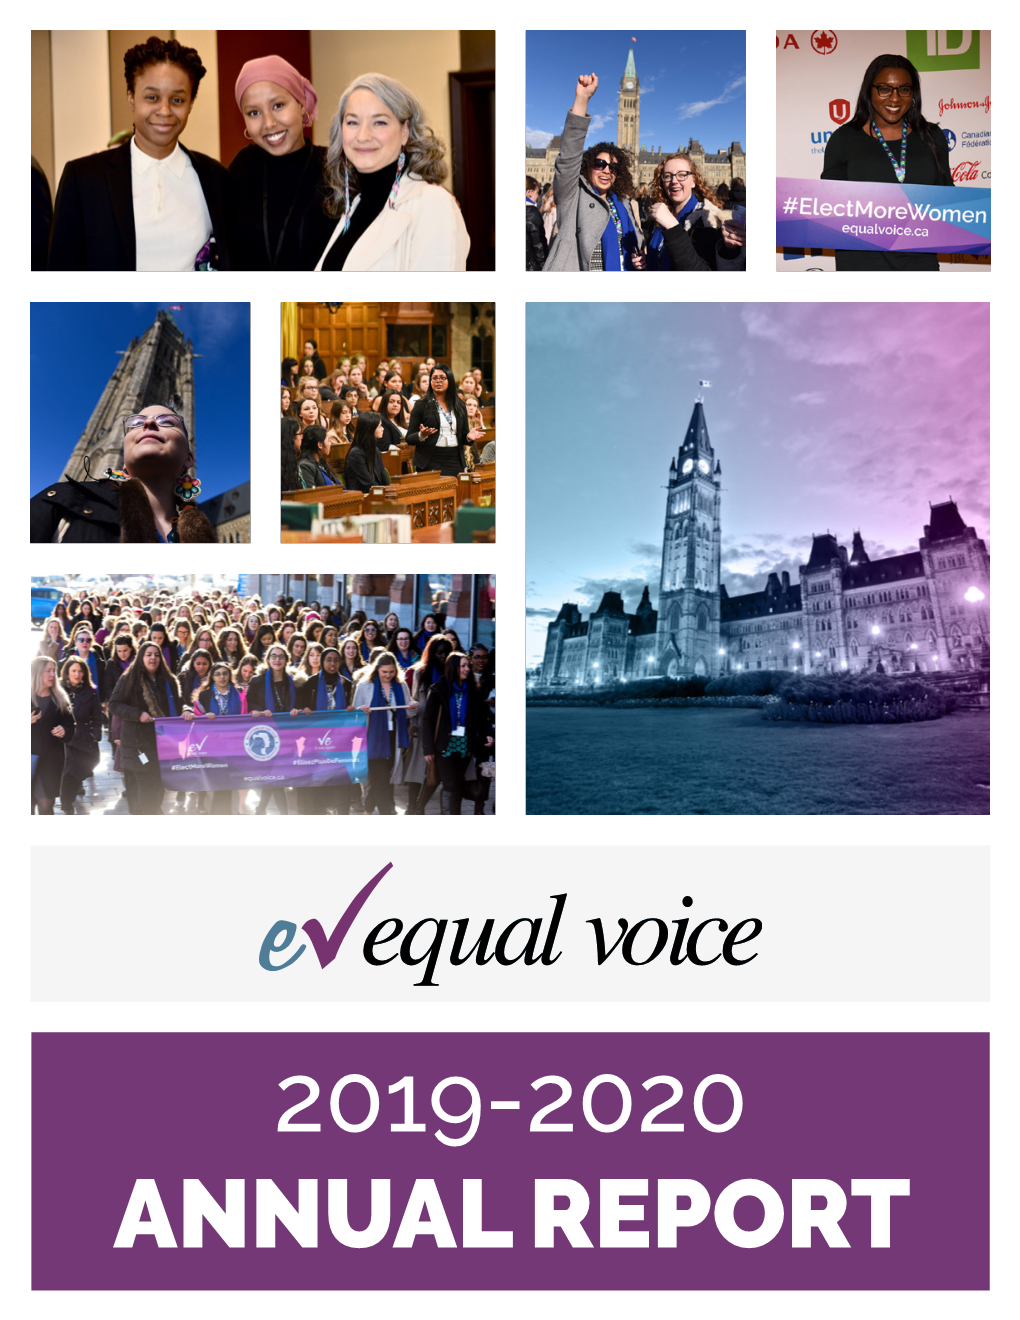 2019-2020 Annual Report Contents